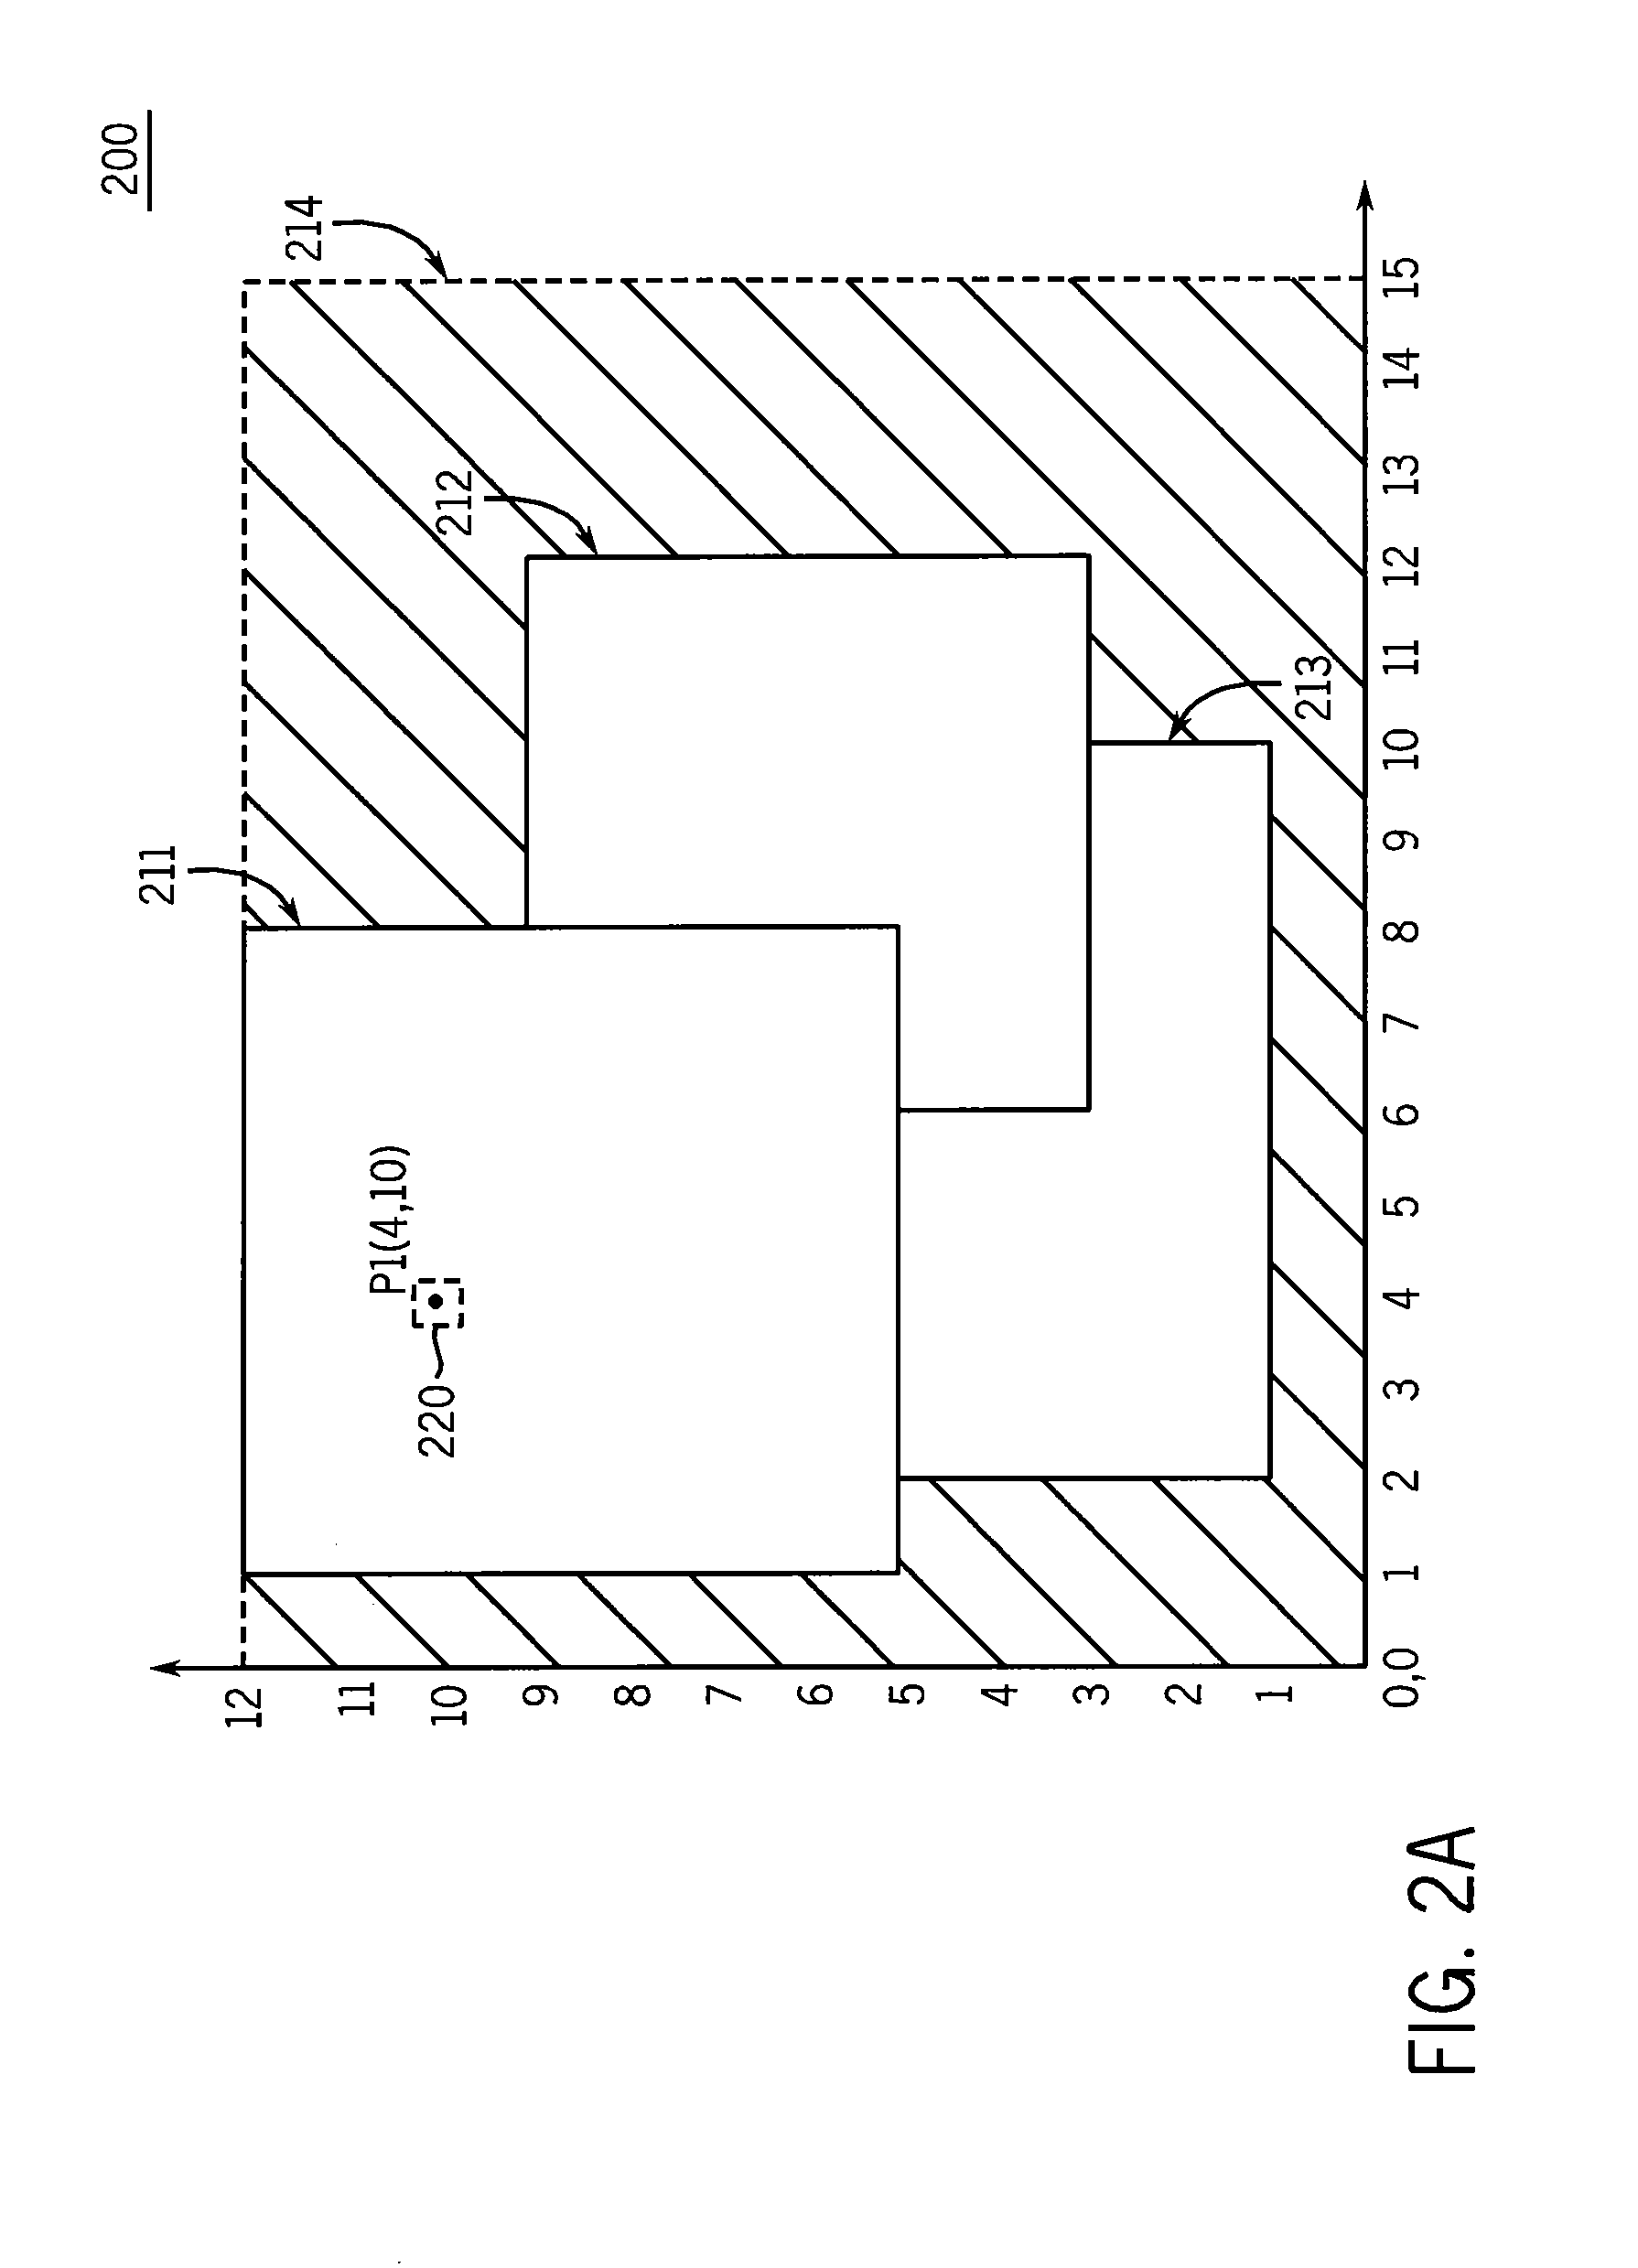 Packet Router Having Improved Packet Classification